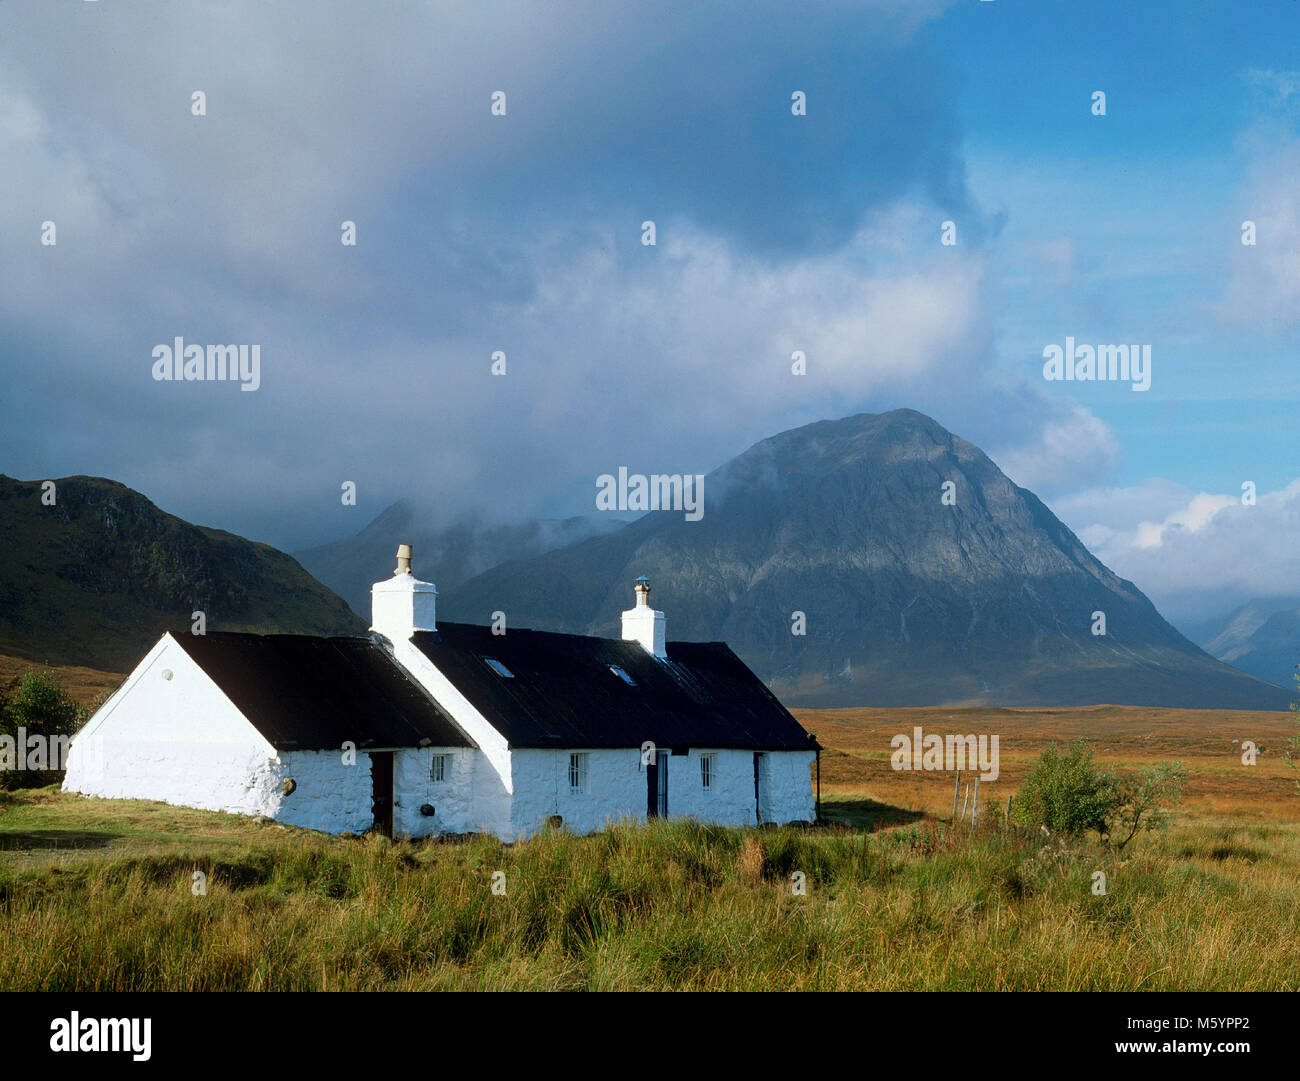 Blackrock Cottage, Glen Coe, Highland, Scotland (A strong contender for the most photographed cottage in the world) Stock Photo